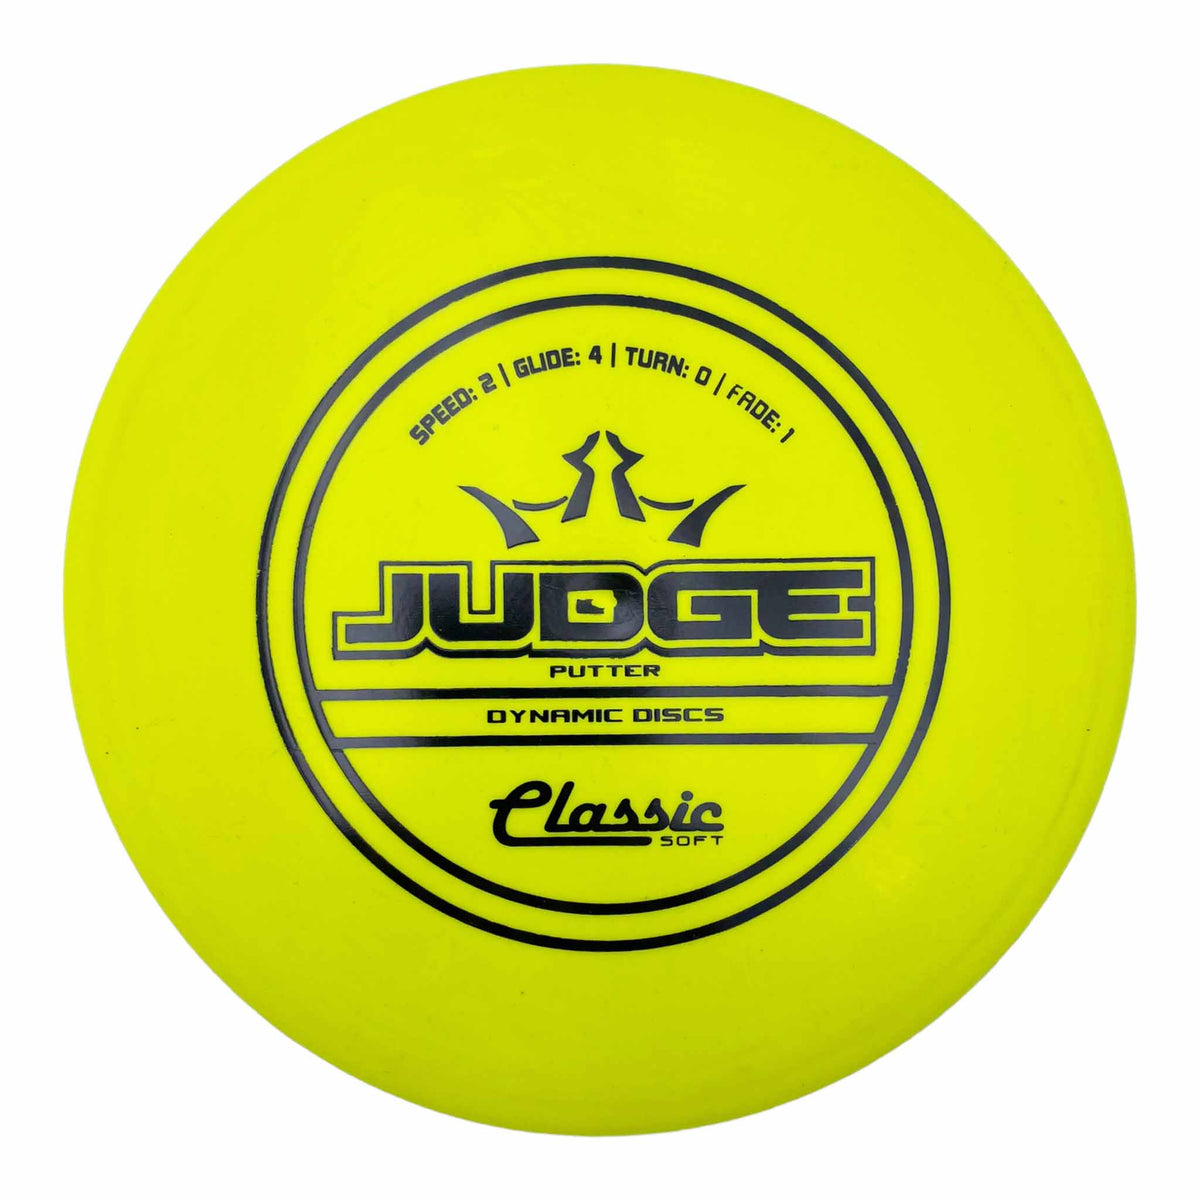 Dynamic Discs Classic Soft Judge putter - Yellow